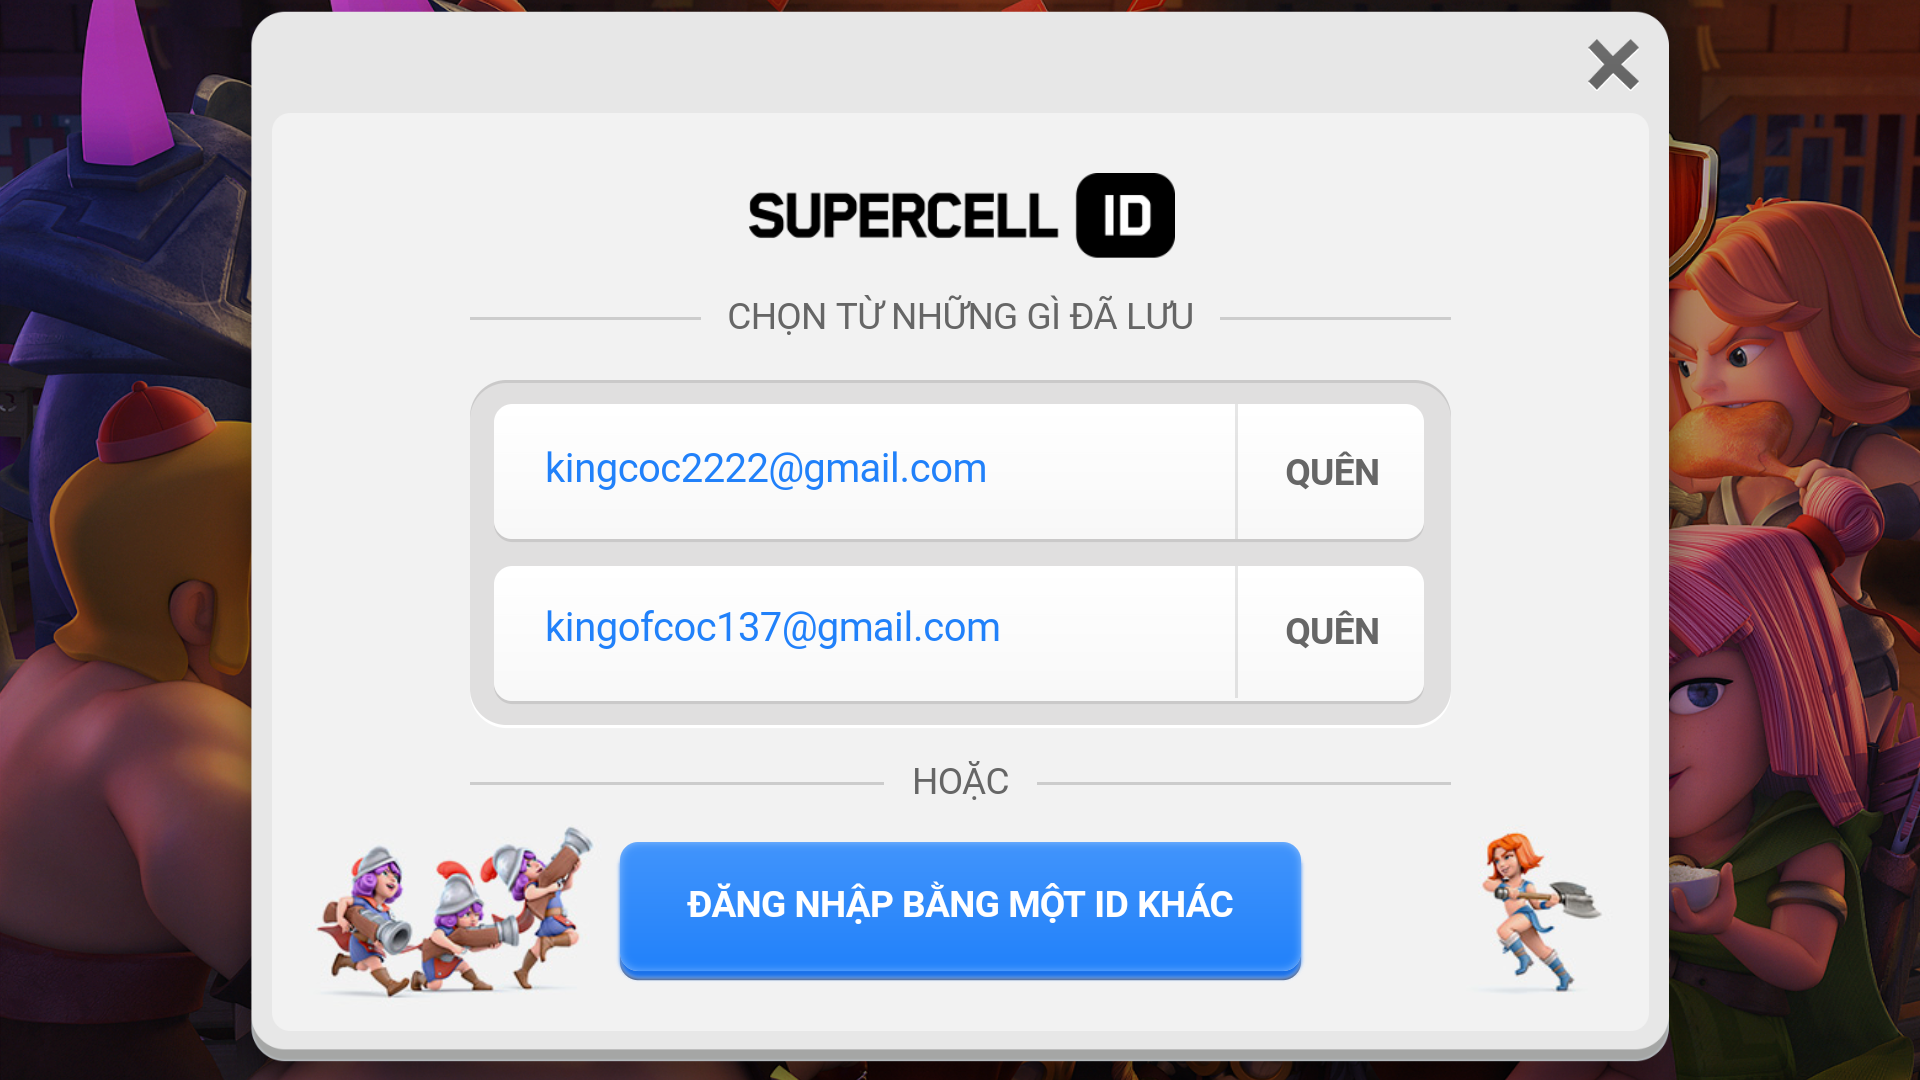 Https id supercell com. Supercell ID код. Суперселл аккаунты. Номер Supercell. Игры Supercell ID.